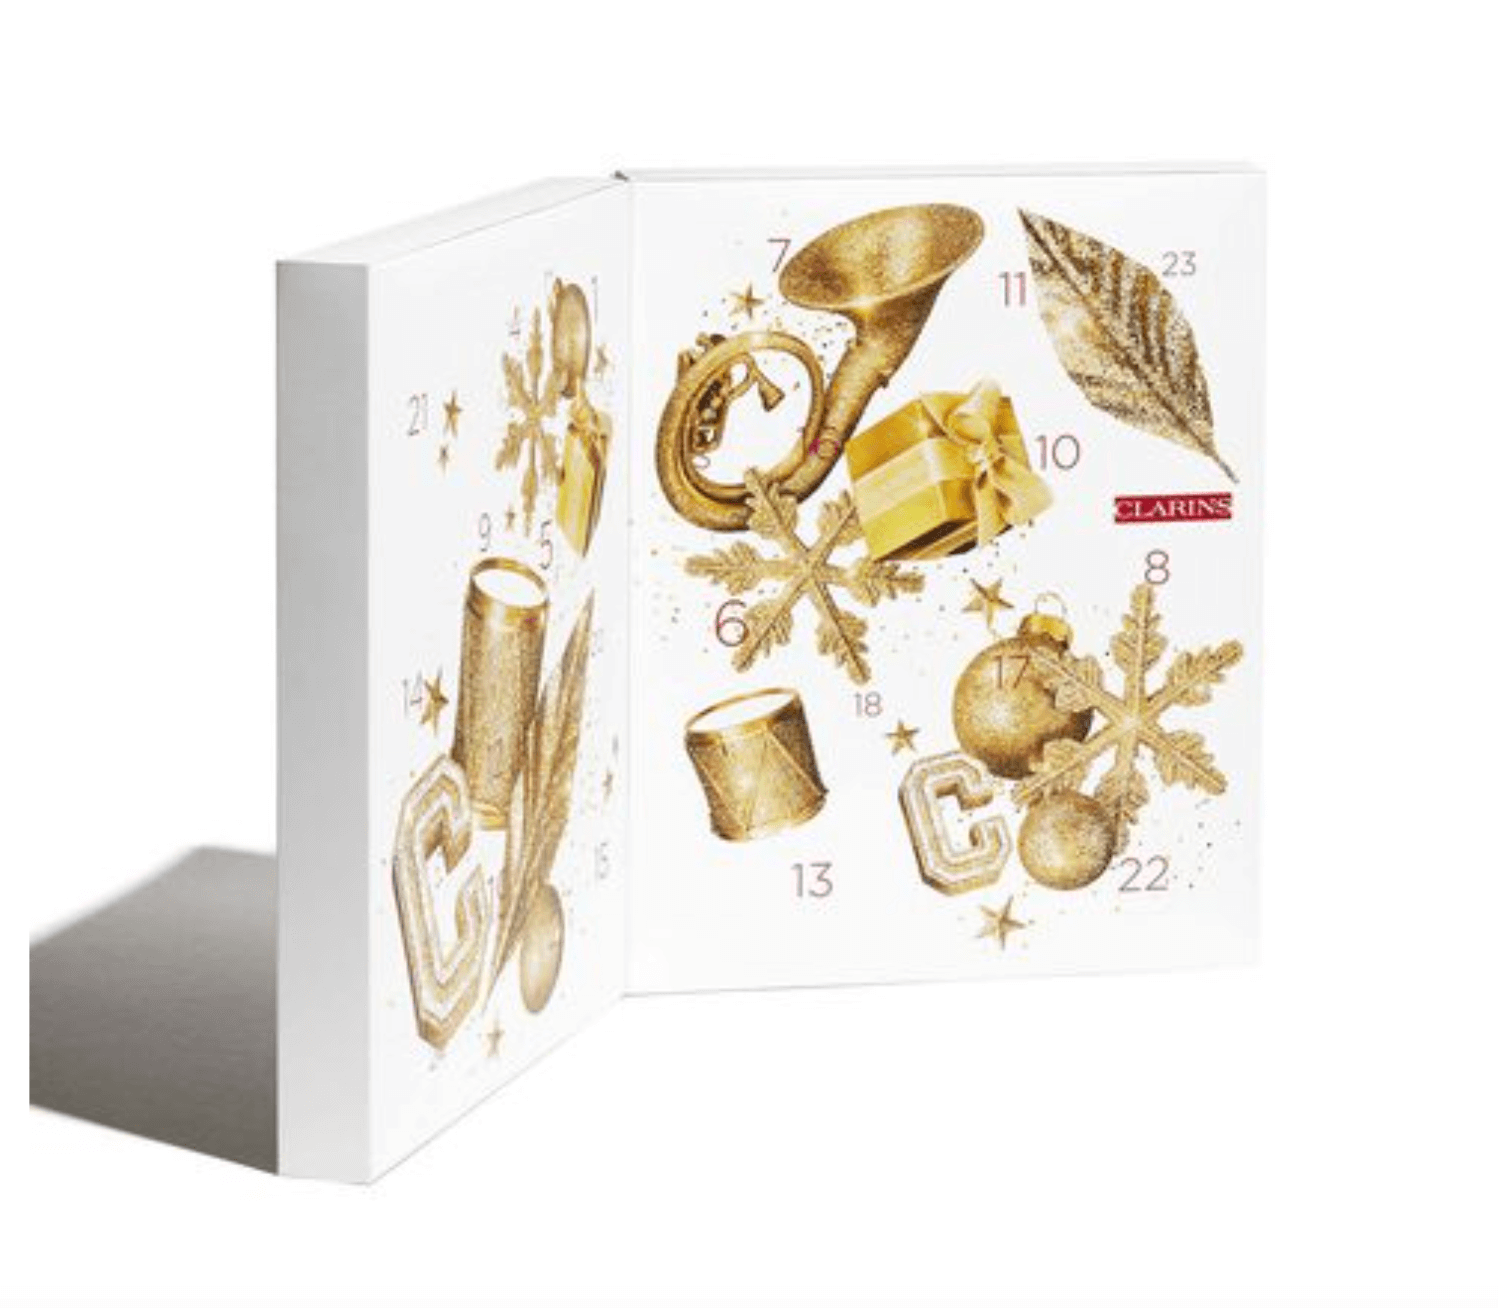 Clarins offers an advent calendar for every person in your life. This includes options like a 12-day, 24-day, and a men's 12-day calendar. 